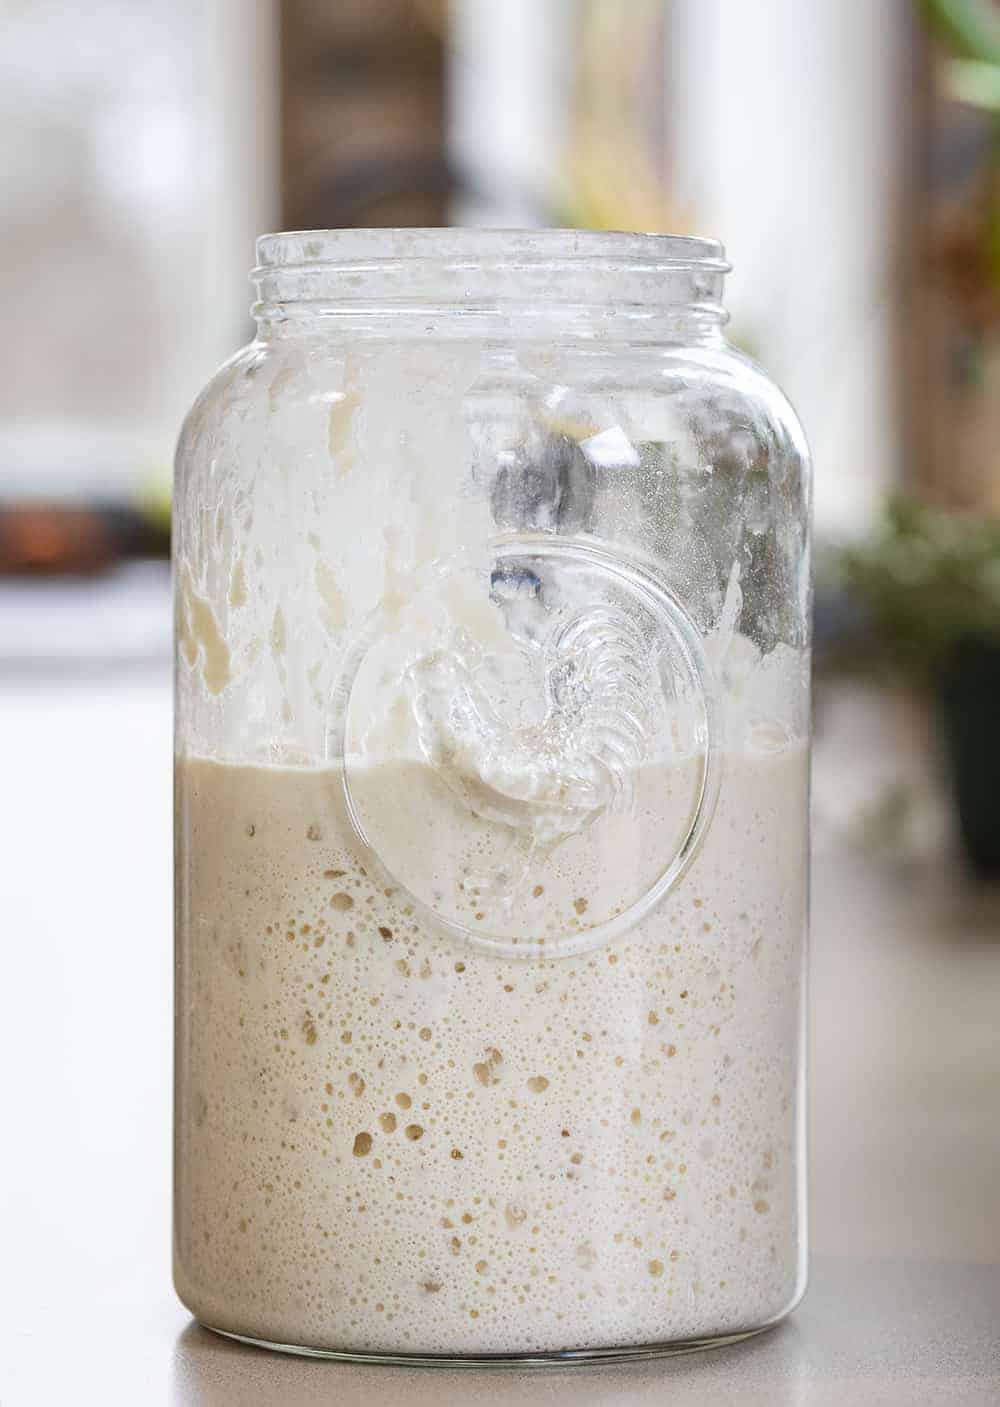 Sourdough Starter in Tall Jar with Bubbles